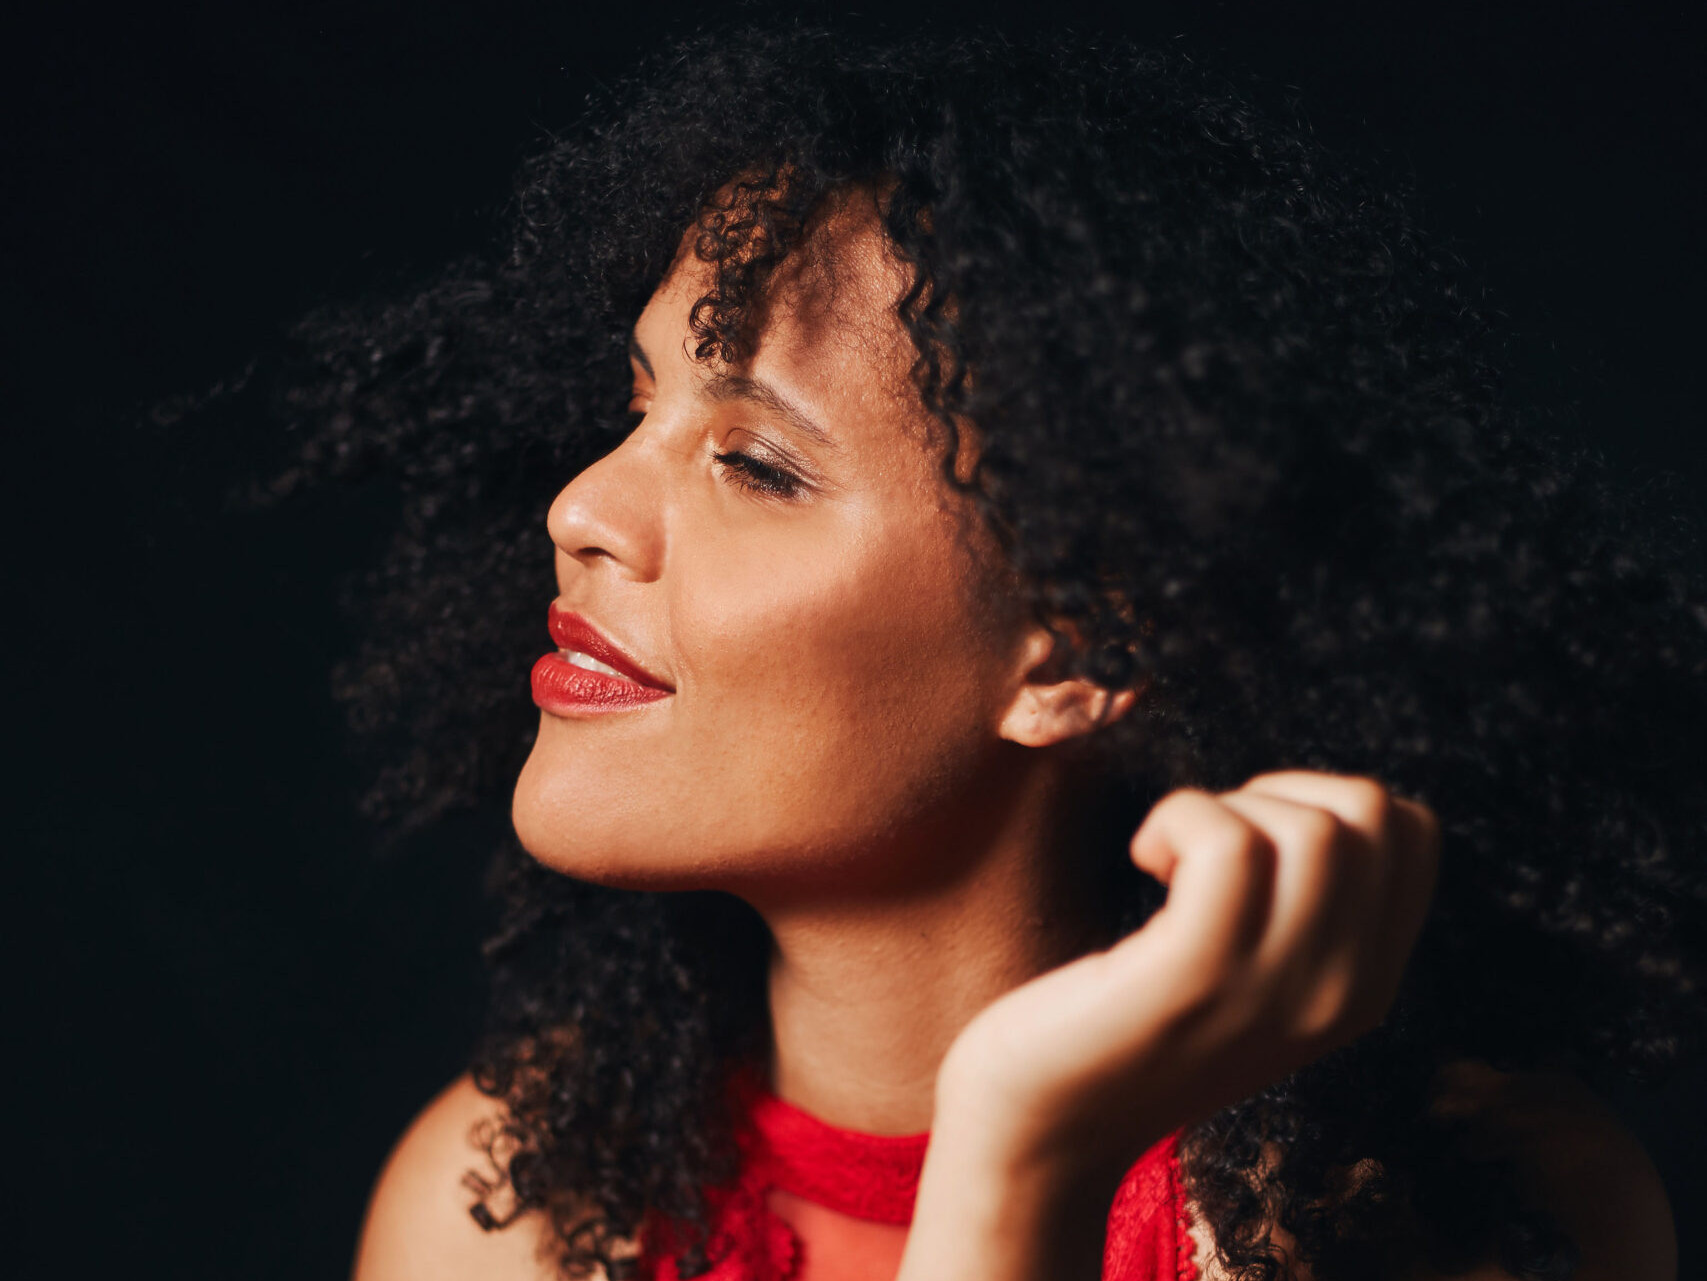  Yasmin Sidibe<br>With her music, the soul/RnB artist appeals to people who are looking for connection. Her German lyrics are a call for self-reflection.